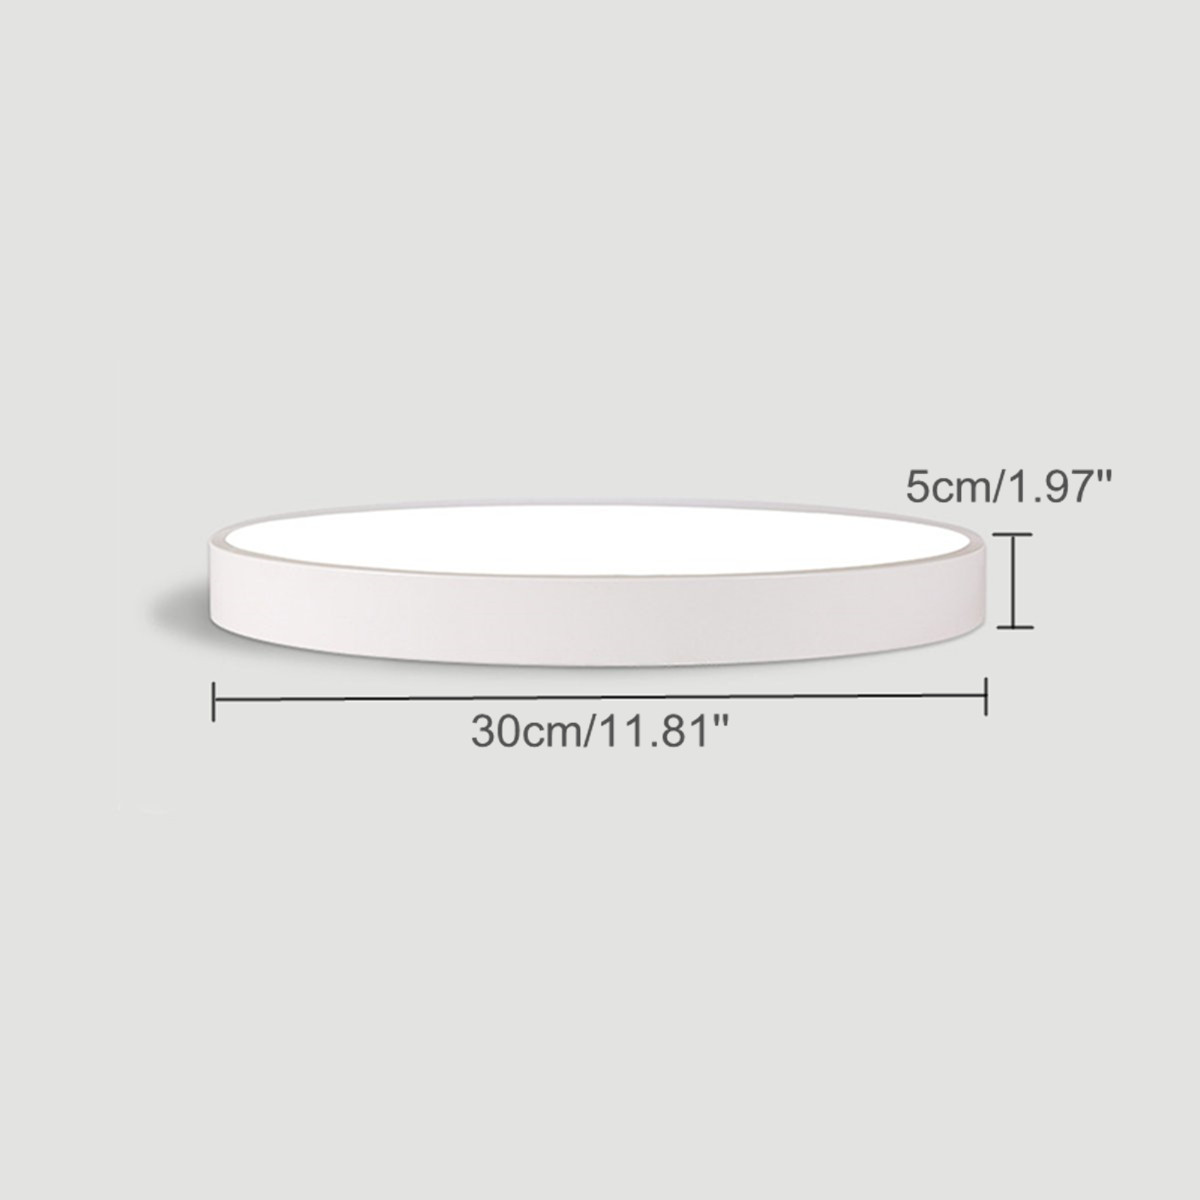 AC220V-18W-Dimming-LED-Ceiling-Down-Light-Remote-Control-Bedroom-Lamp-Living-Room-Mount-Fixture-1709815-9